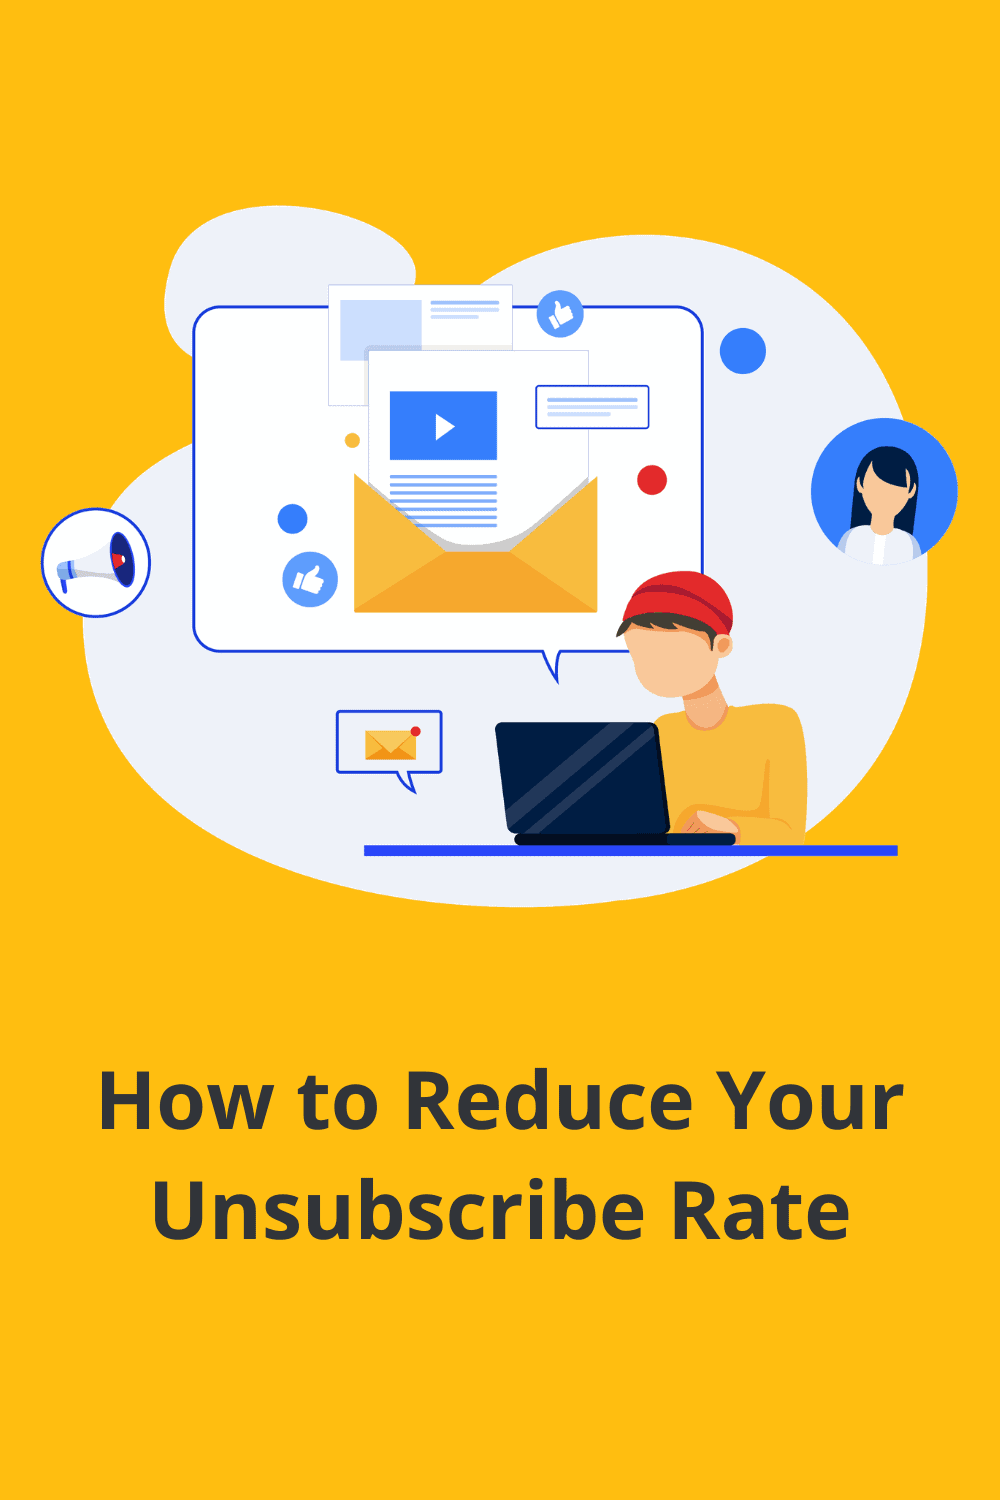 Using the tips that I’ve outlined here will help you keep subscribers and turn them into paying customers. via @scopedesign